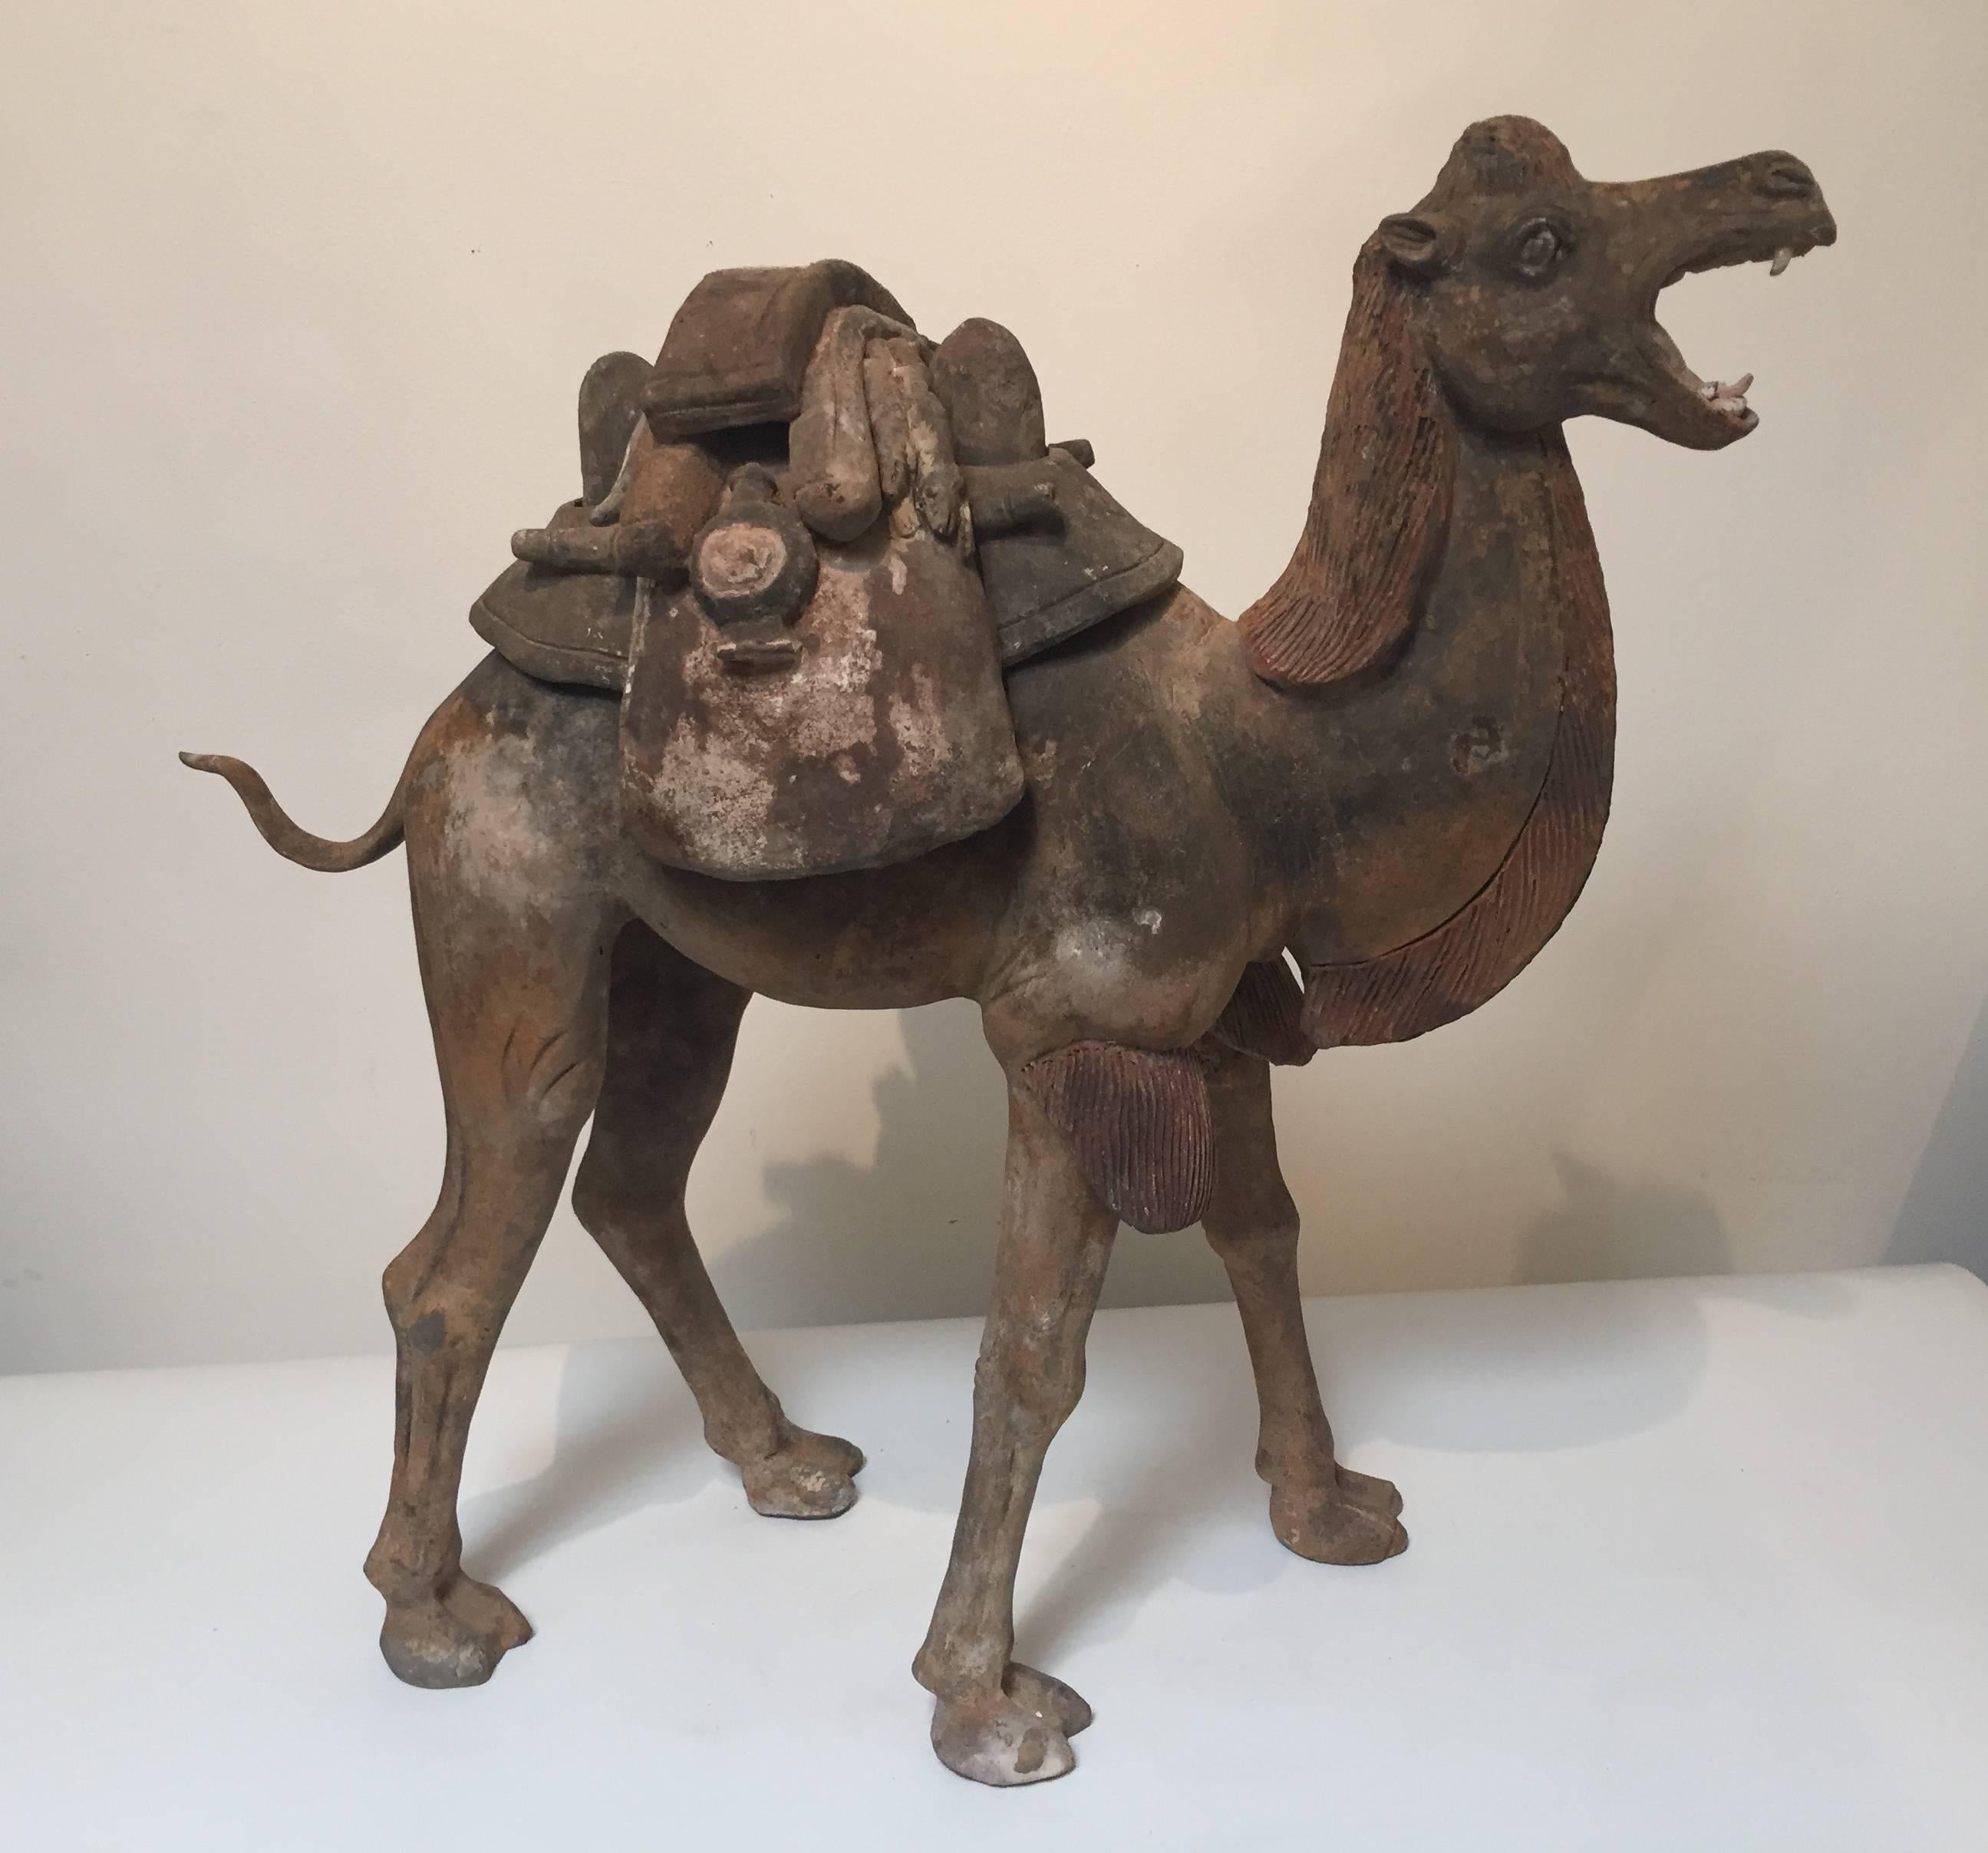 A rare early Tang dynasty camel (7th century) with two-piece removable saddle.
The Tang craftsmanship captures the lively and animated expression of this fierce beast. A dark patina covers much of the body, and some pigment remains are found around